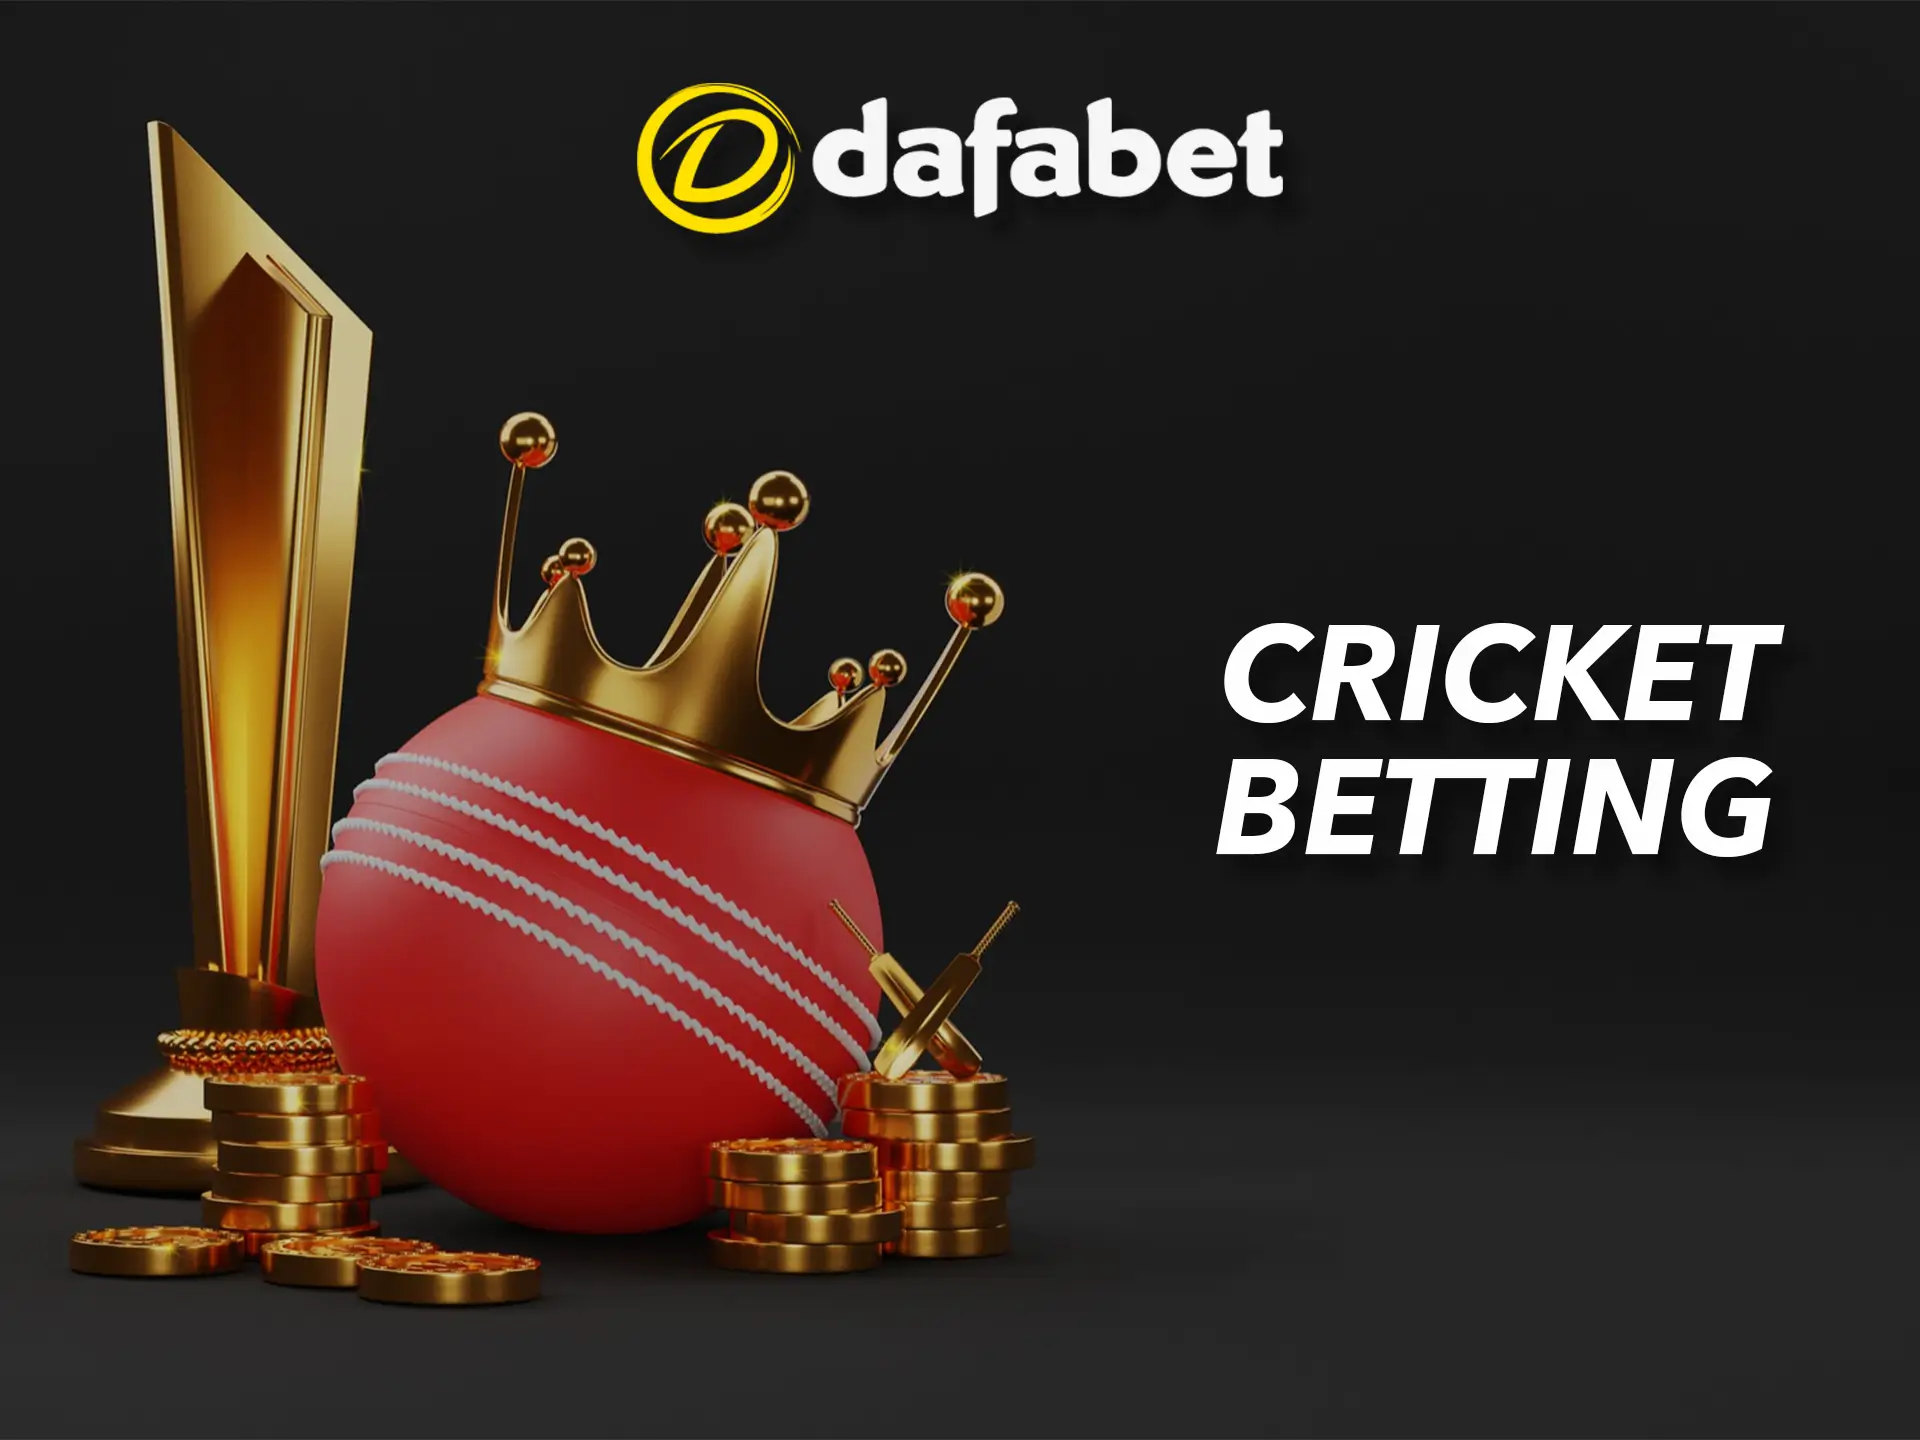 Cricket fans will appreciate the number of tournaments to bet on at Dafabet.